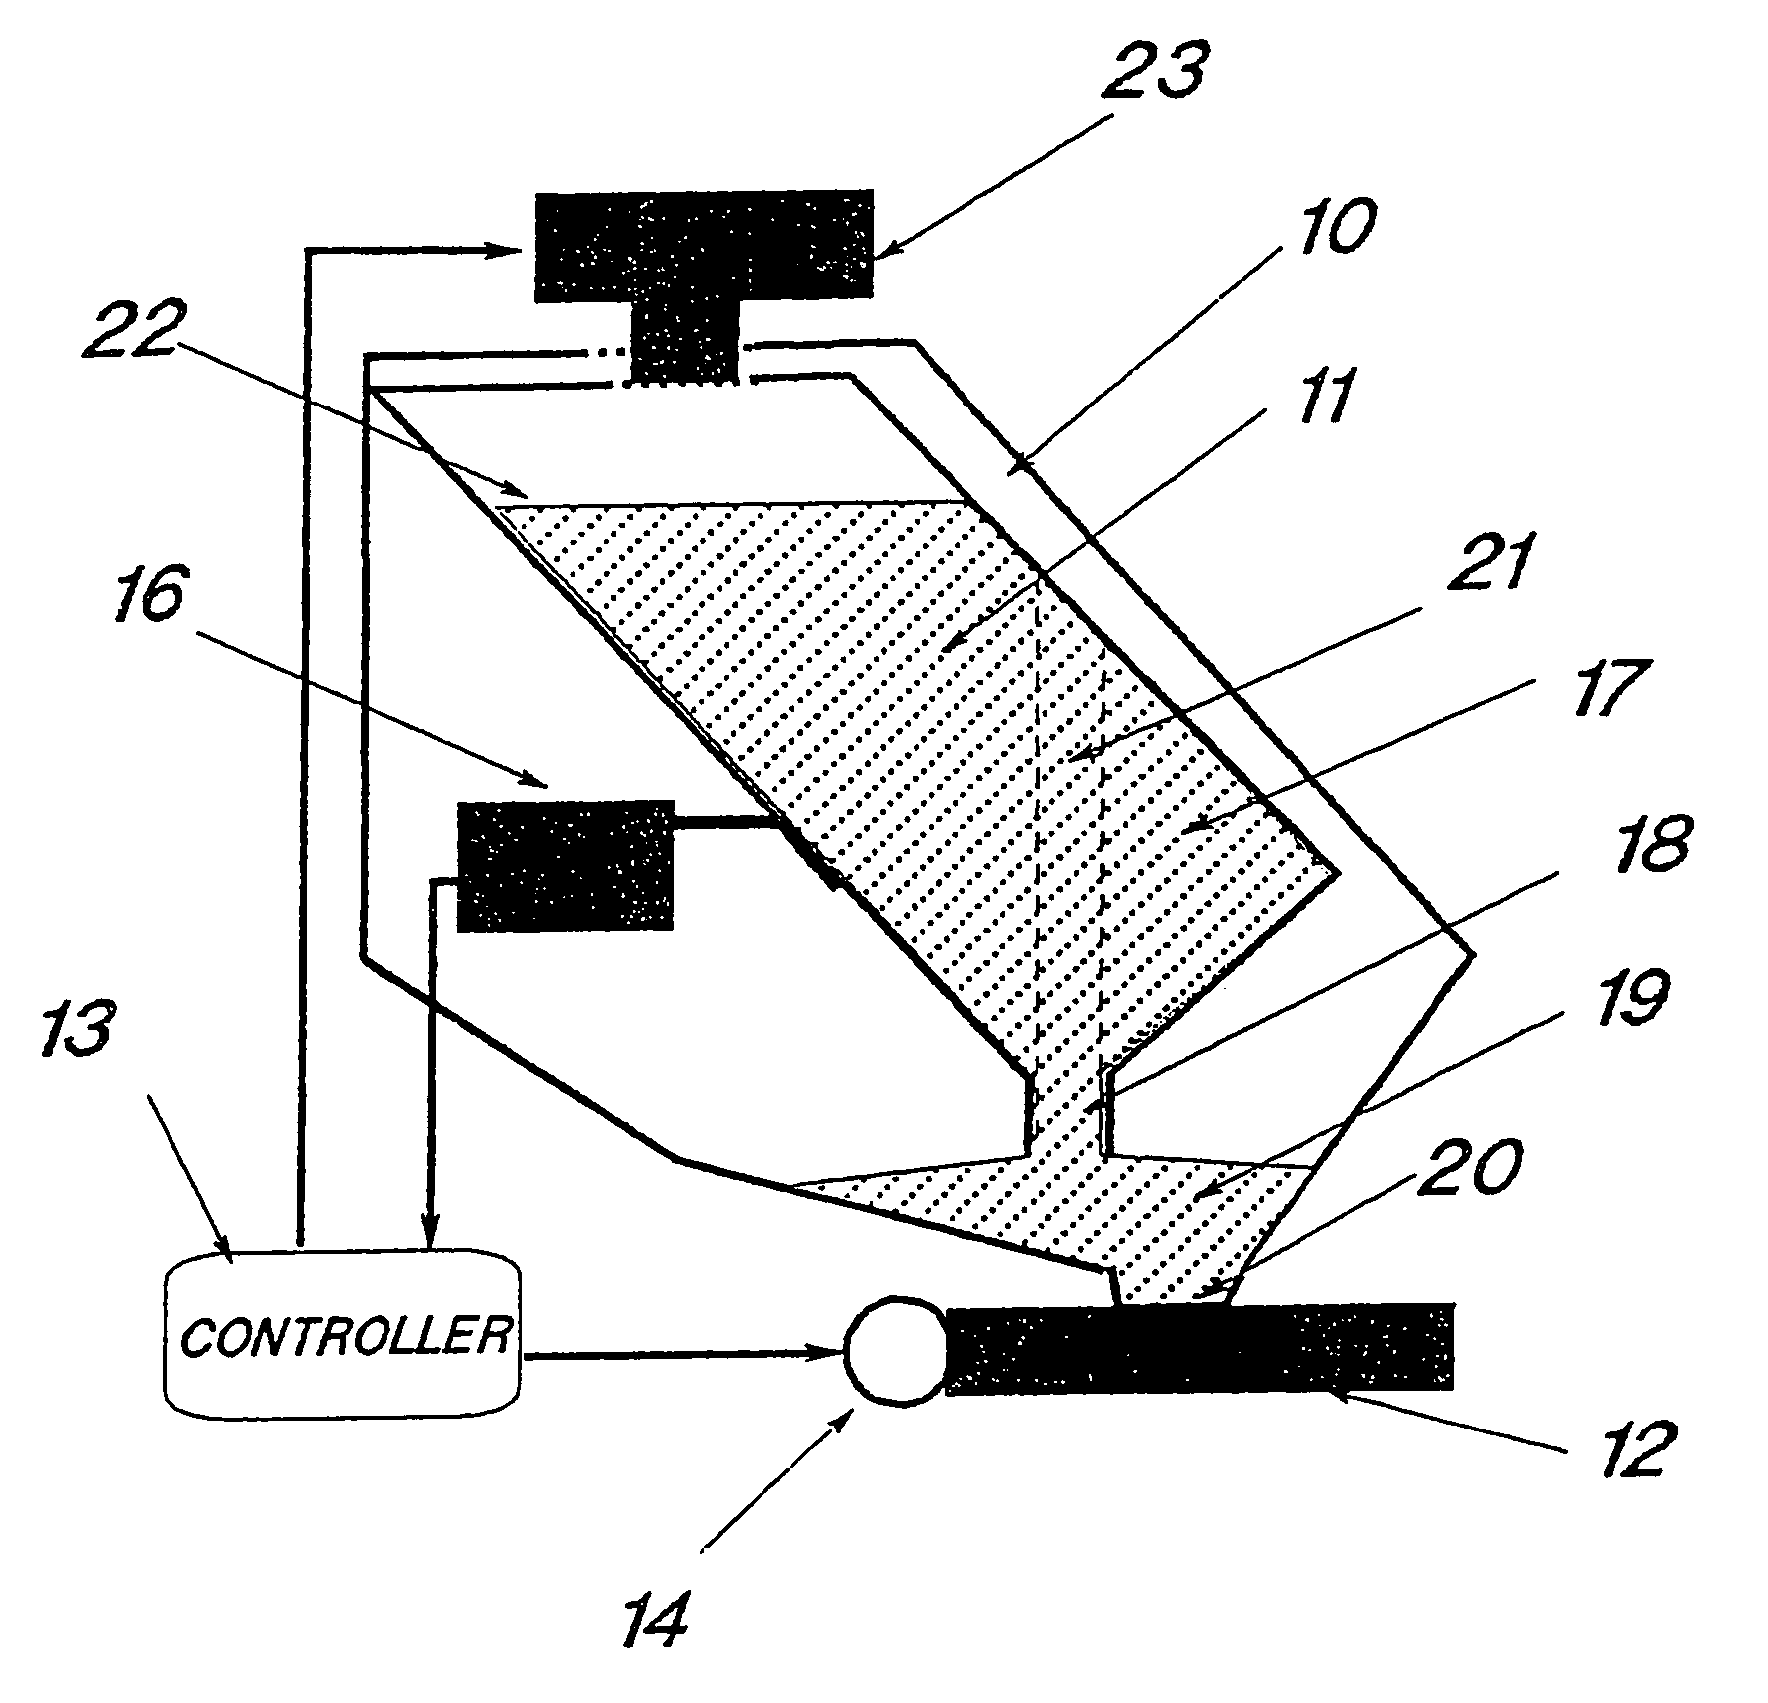 System for feeding portions of material to an injection molding machine